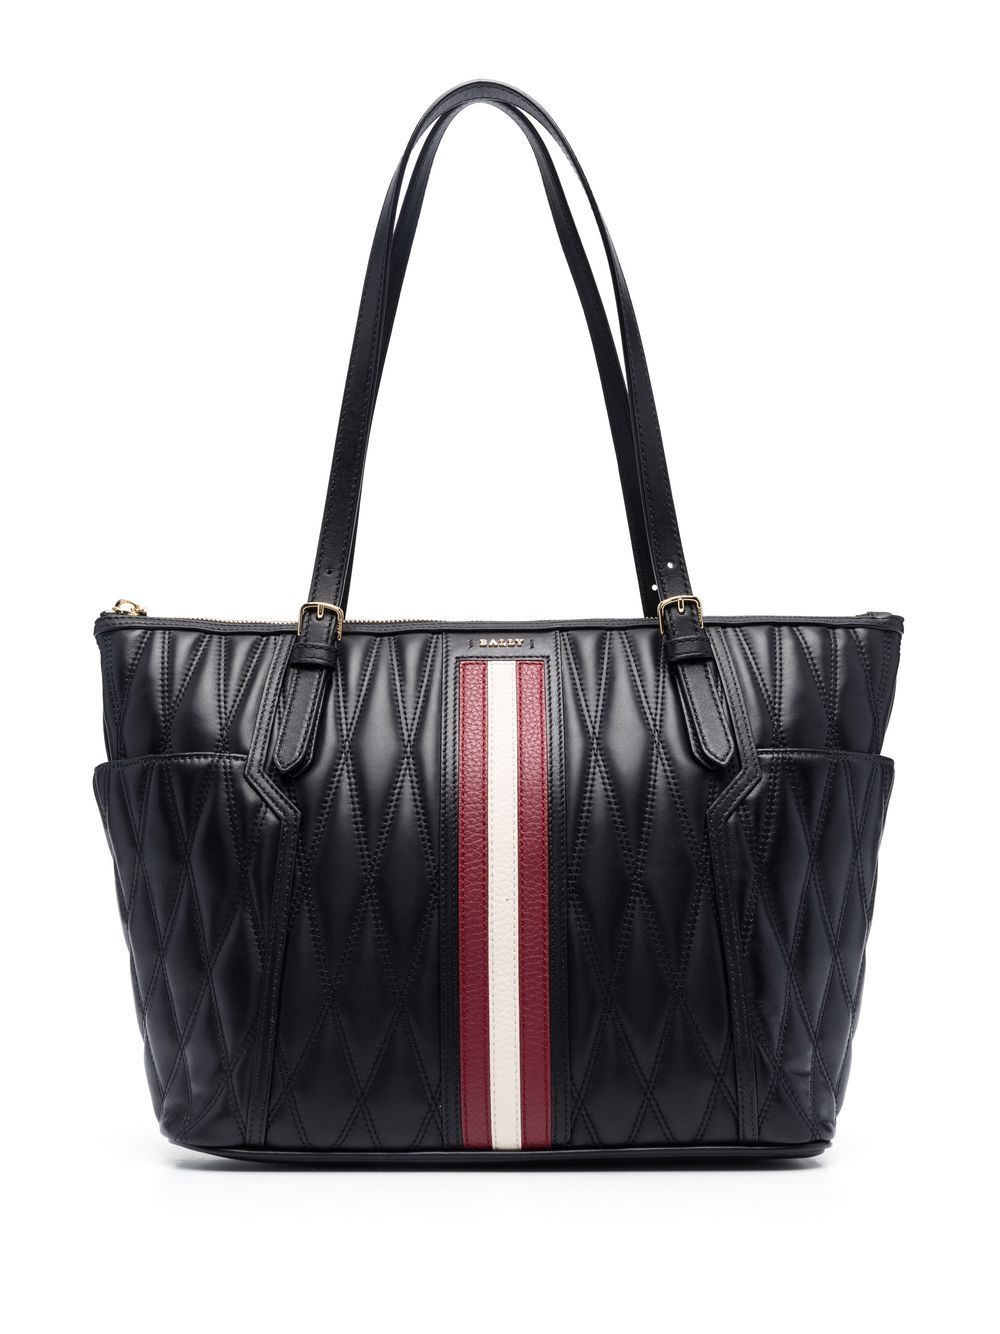 Bally Damirah quilted leather tote bag - Black von Bally